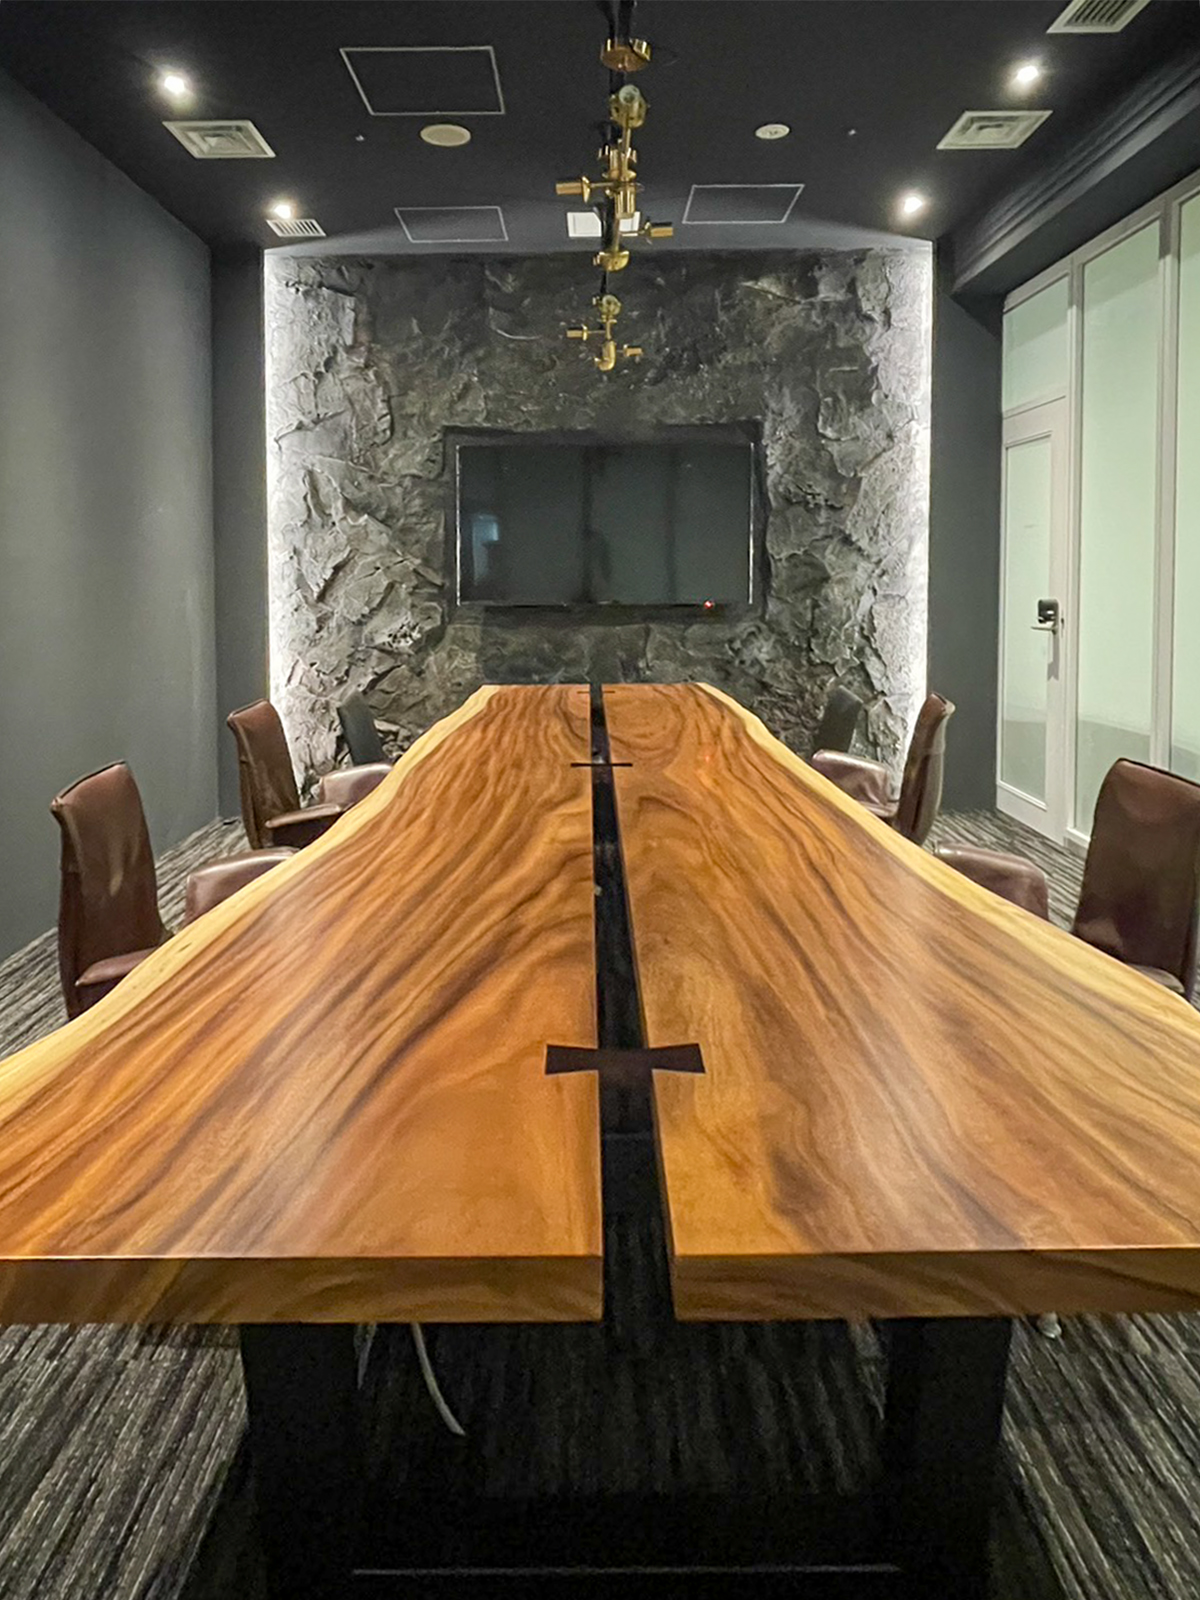 CONFERENCE ROOM